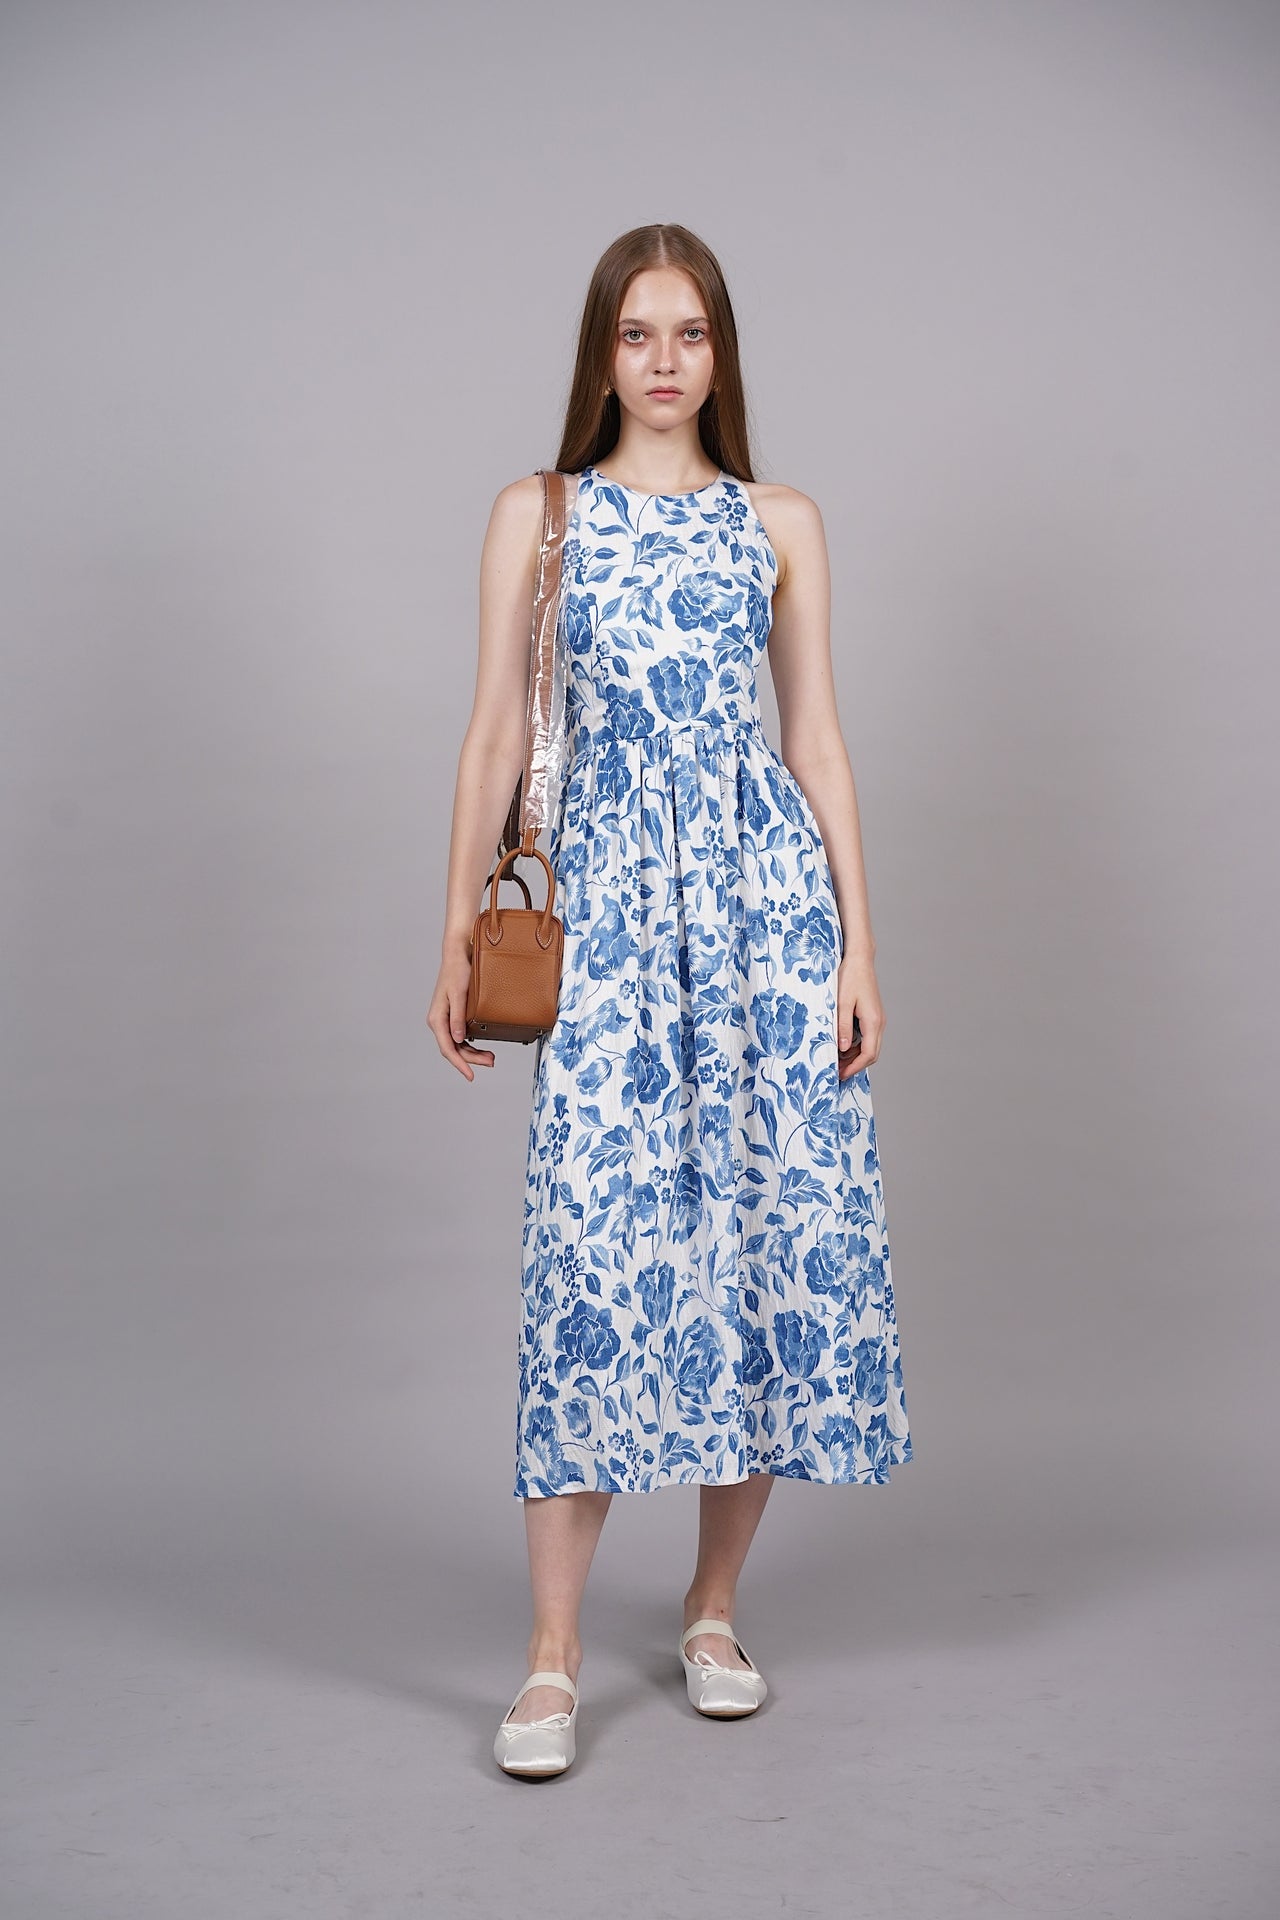 Gathered Midi Dress in Blue Floral - Arriving Soon